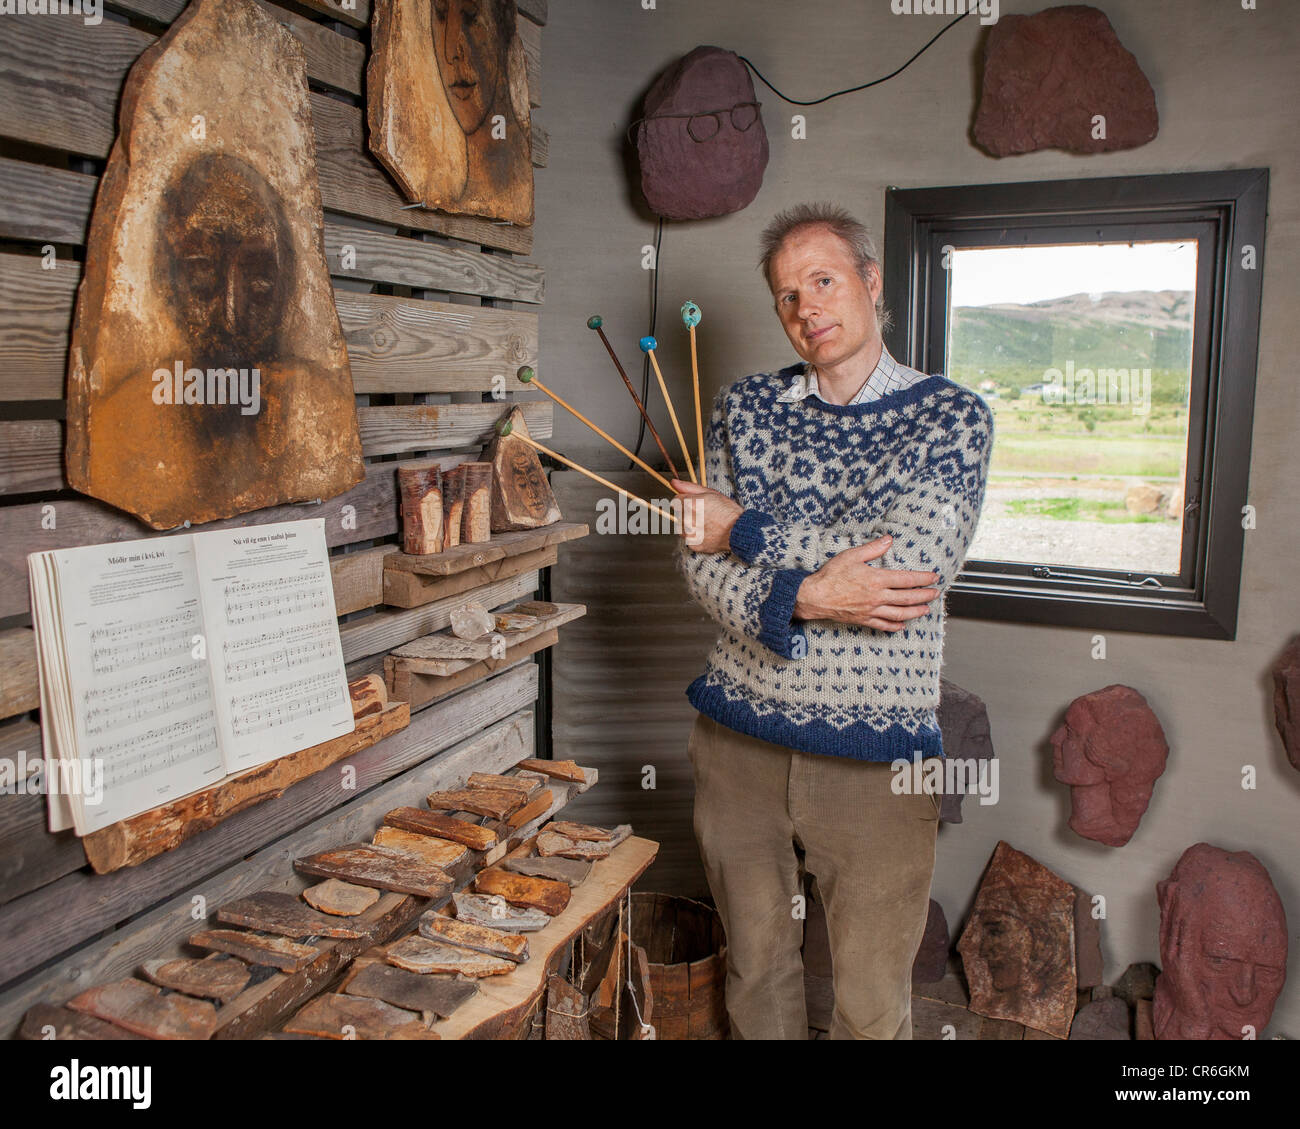 Stone Artist with handmade xylophone and other works, Borgarfjordur Iceland Stock Photo